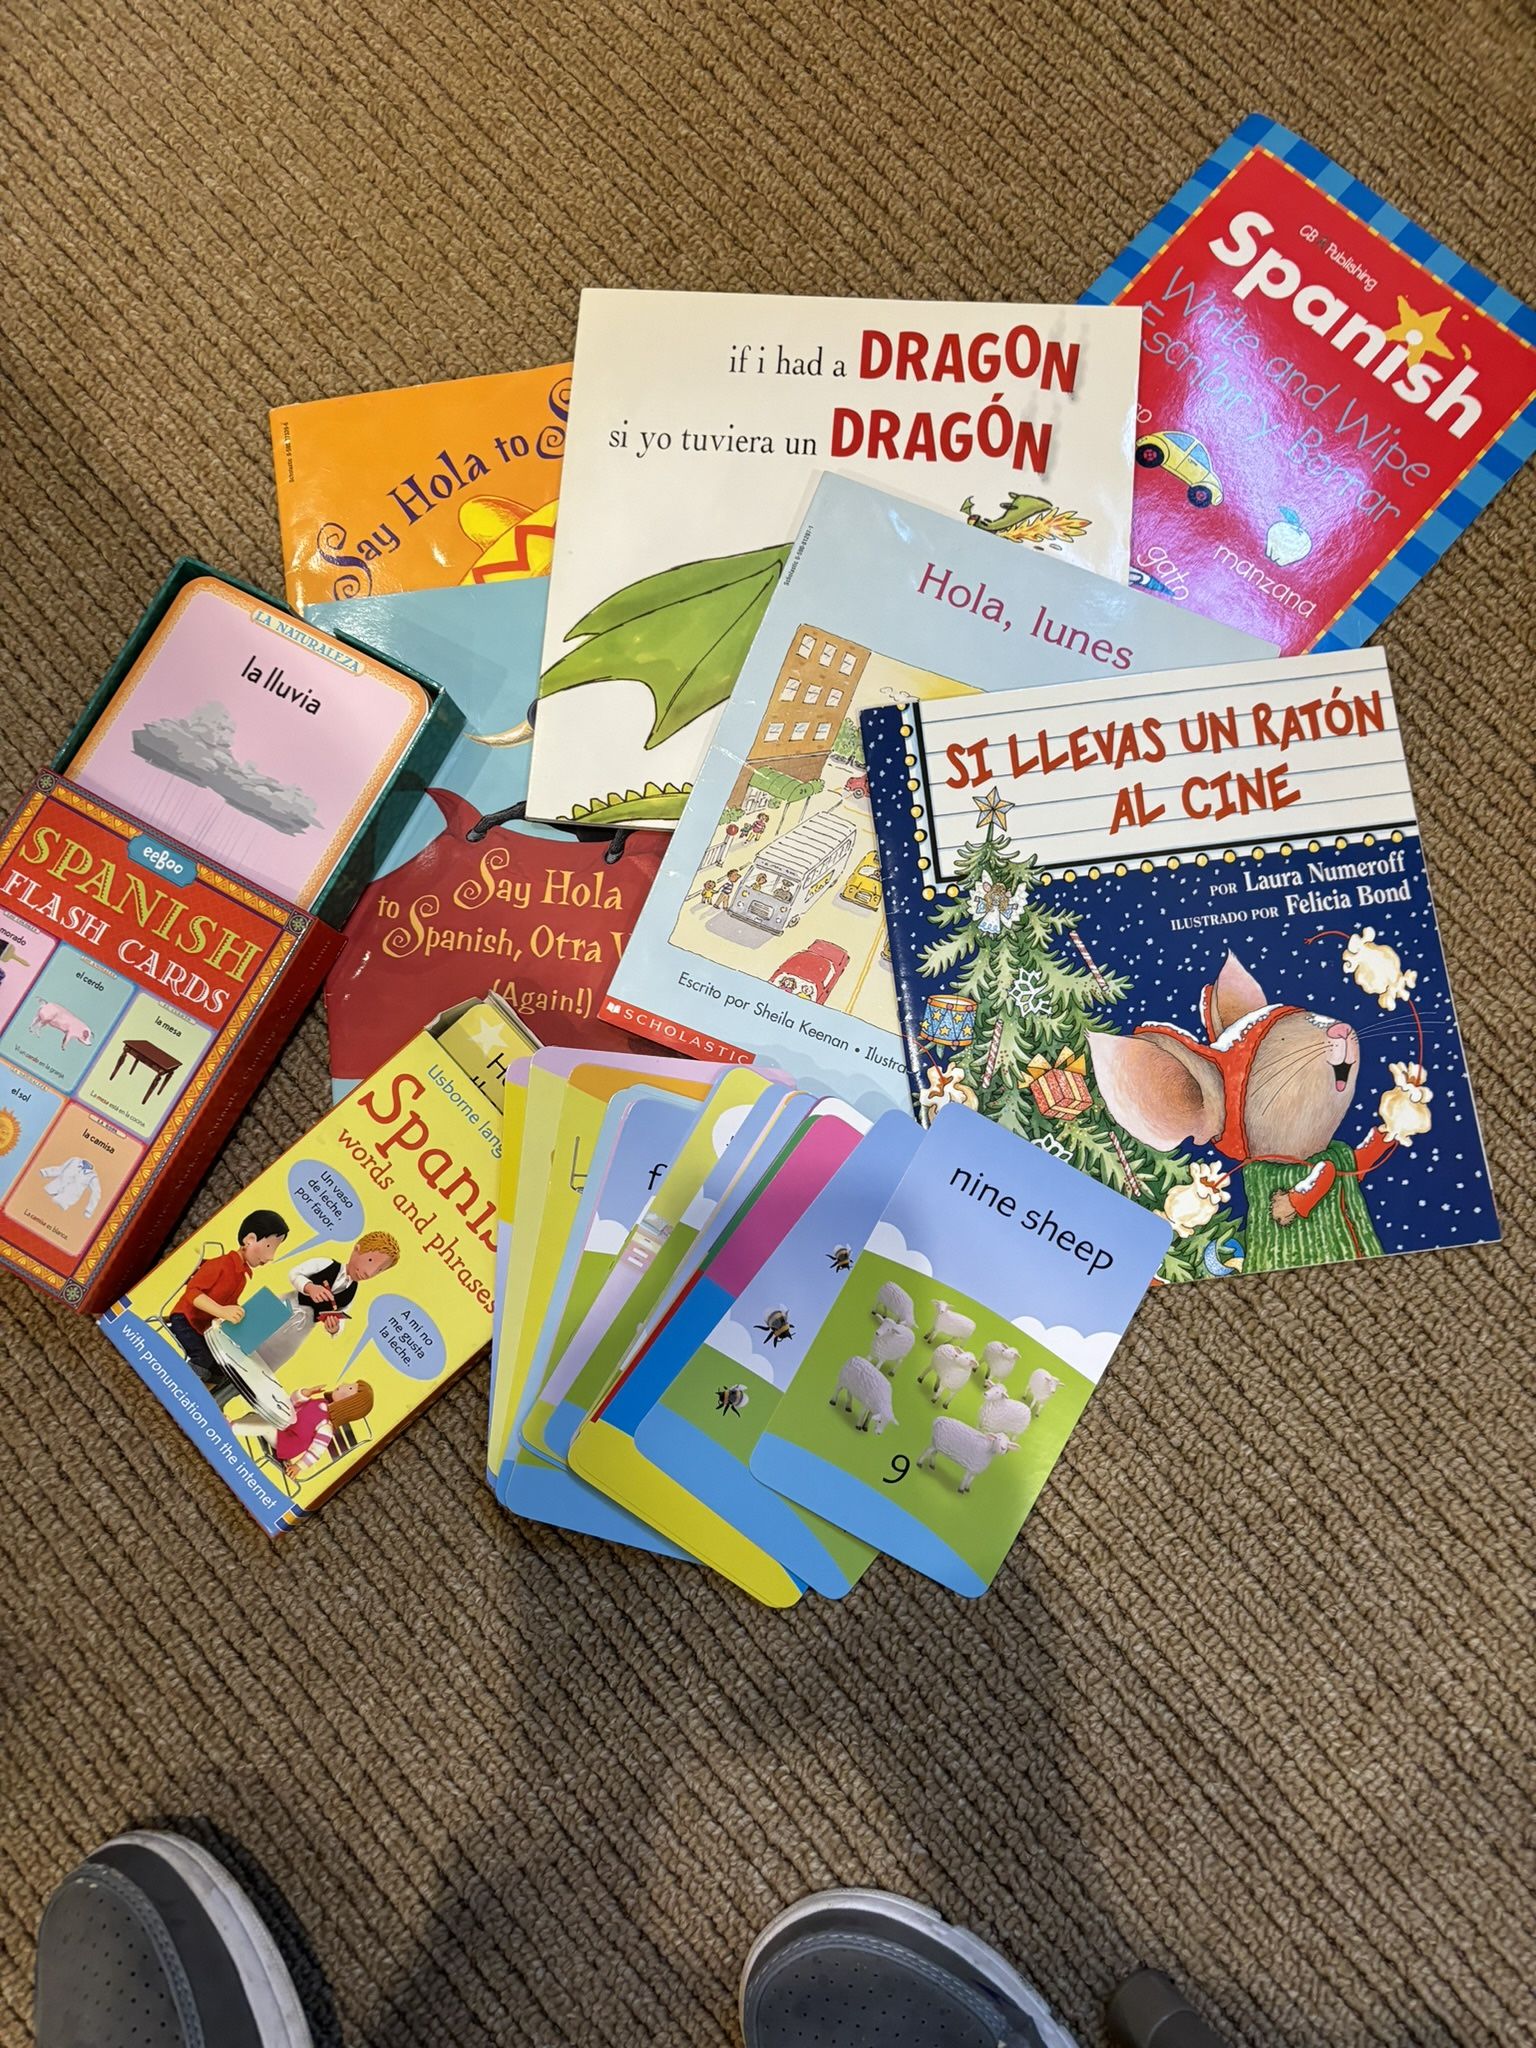 New -6 Spanish Books - Plus 2 Boxes Of Large Flash Cards - Plus One Book Is A Write And Wipe Spanish Book